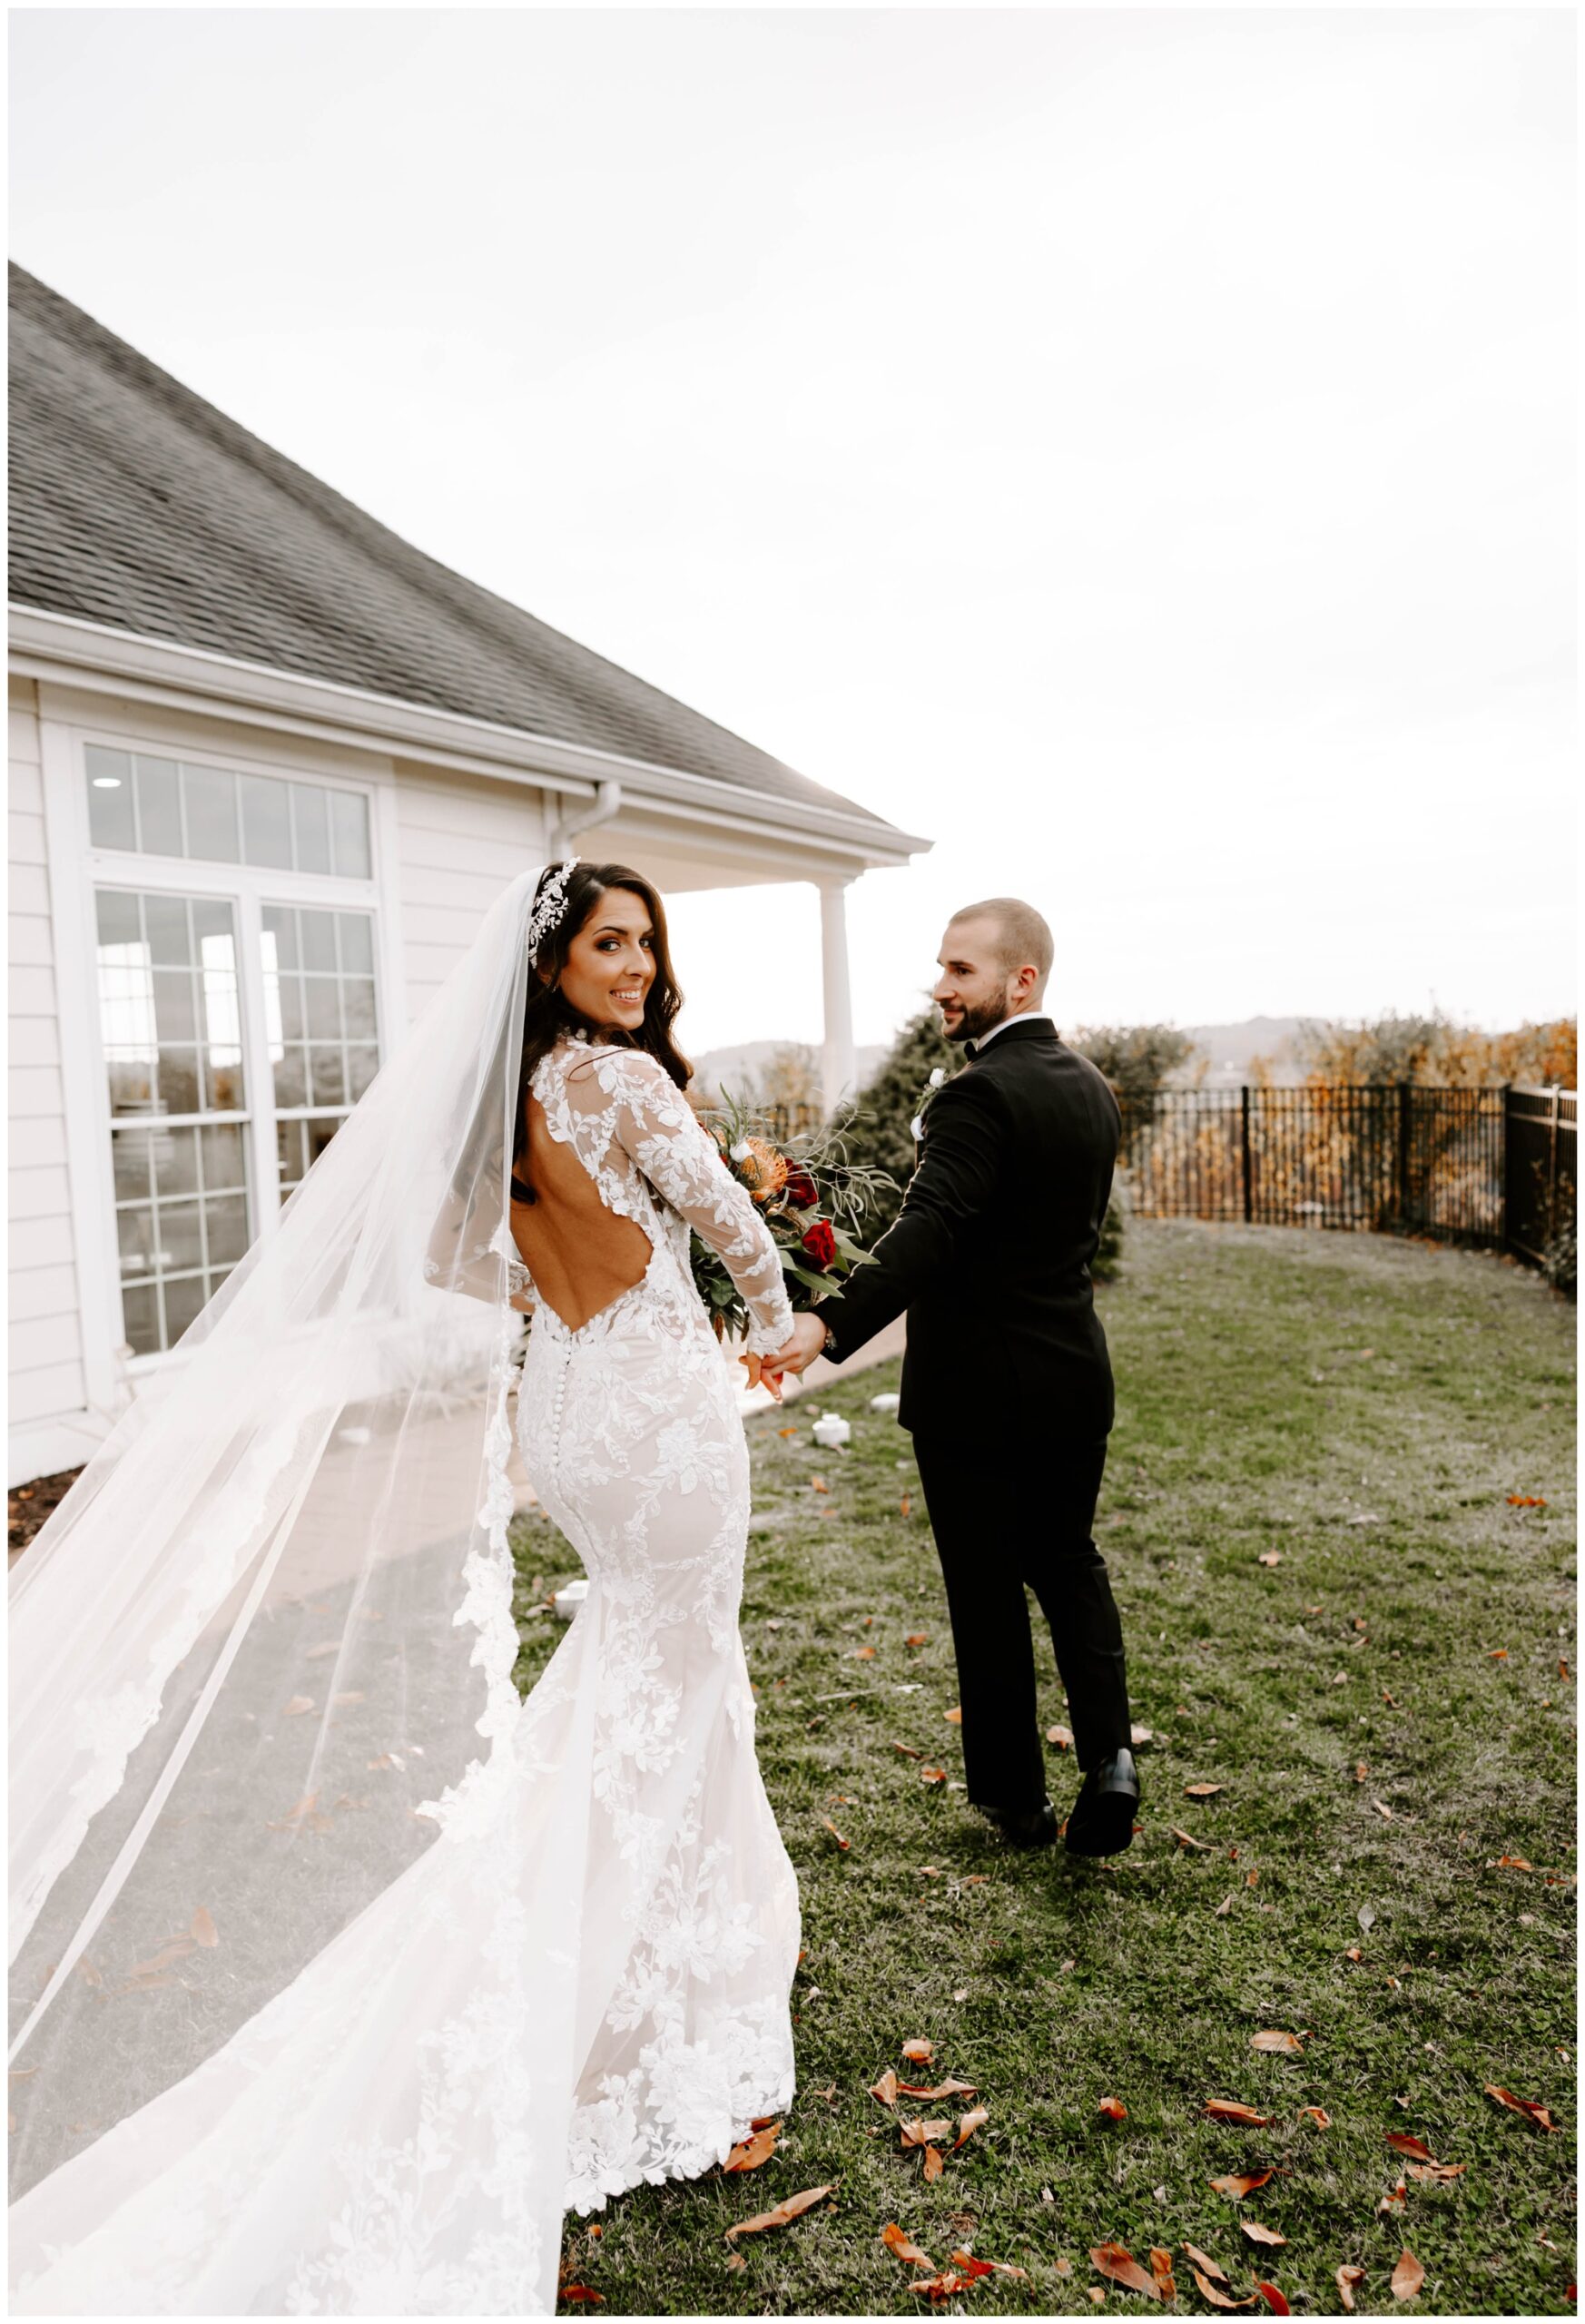 outdoor wedding venues with countryside views near Pittsburgh